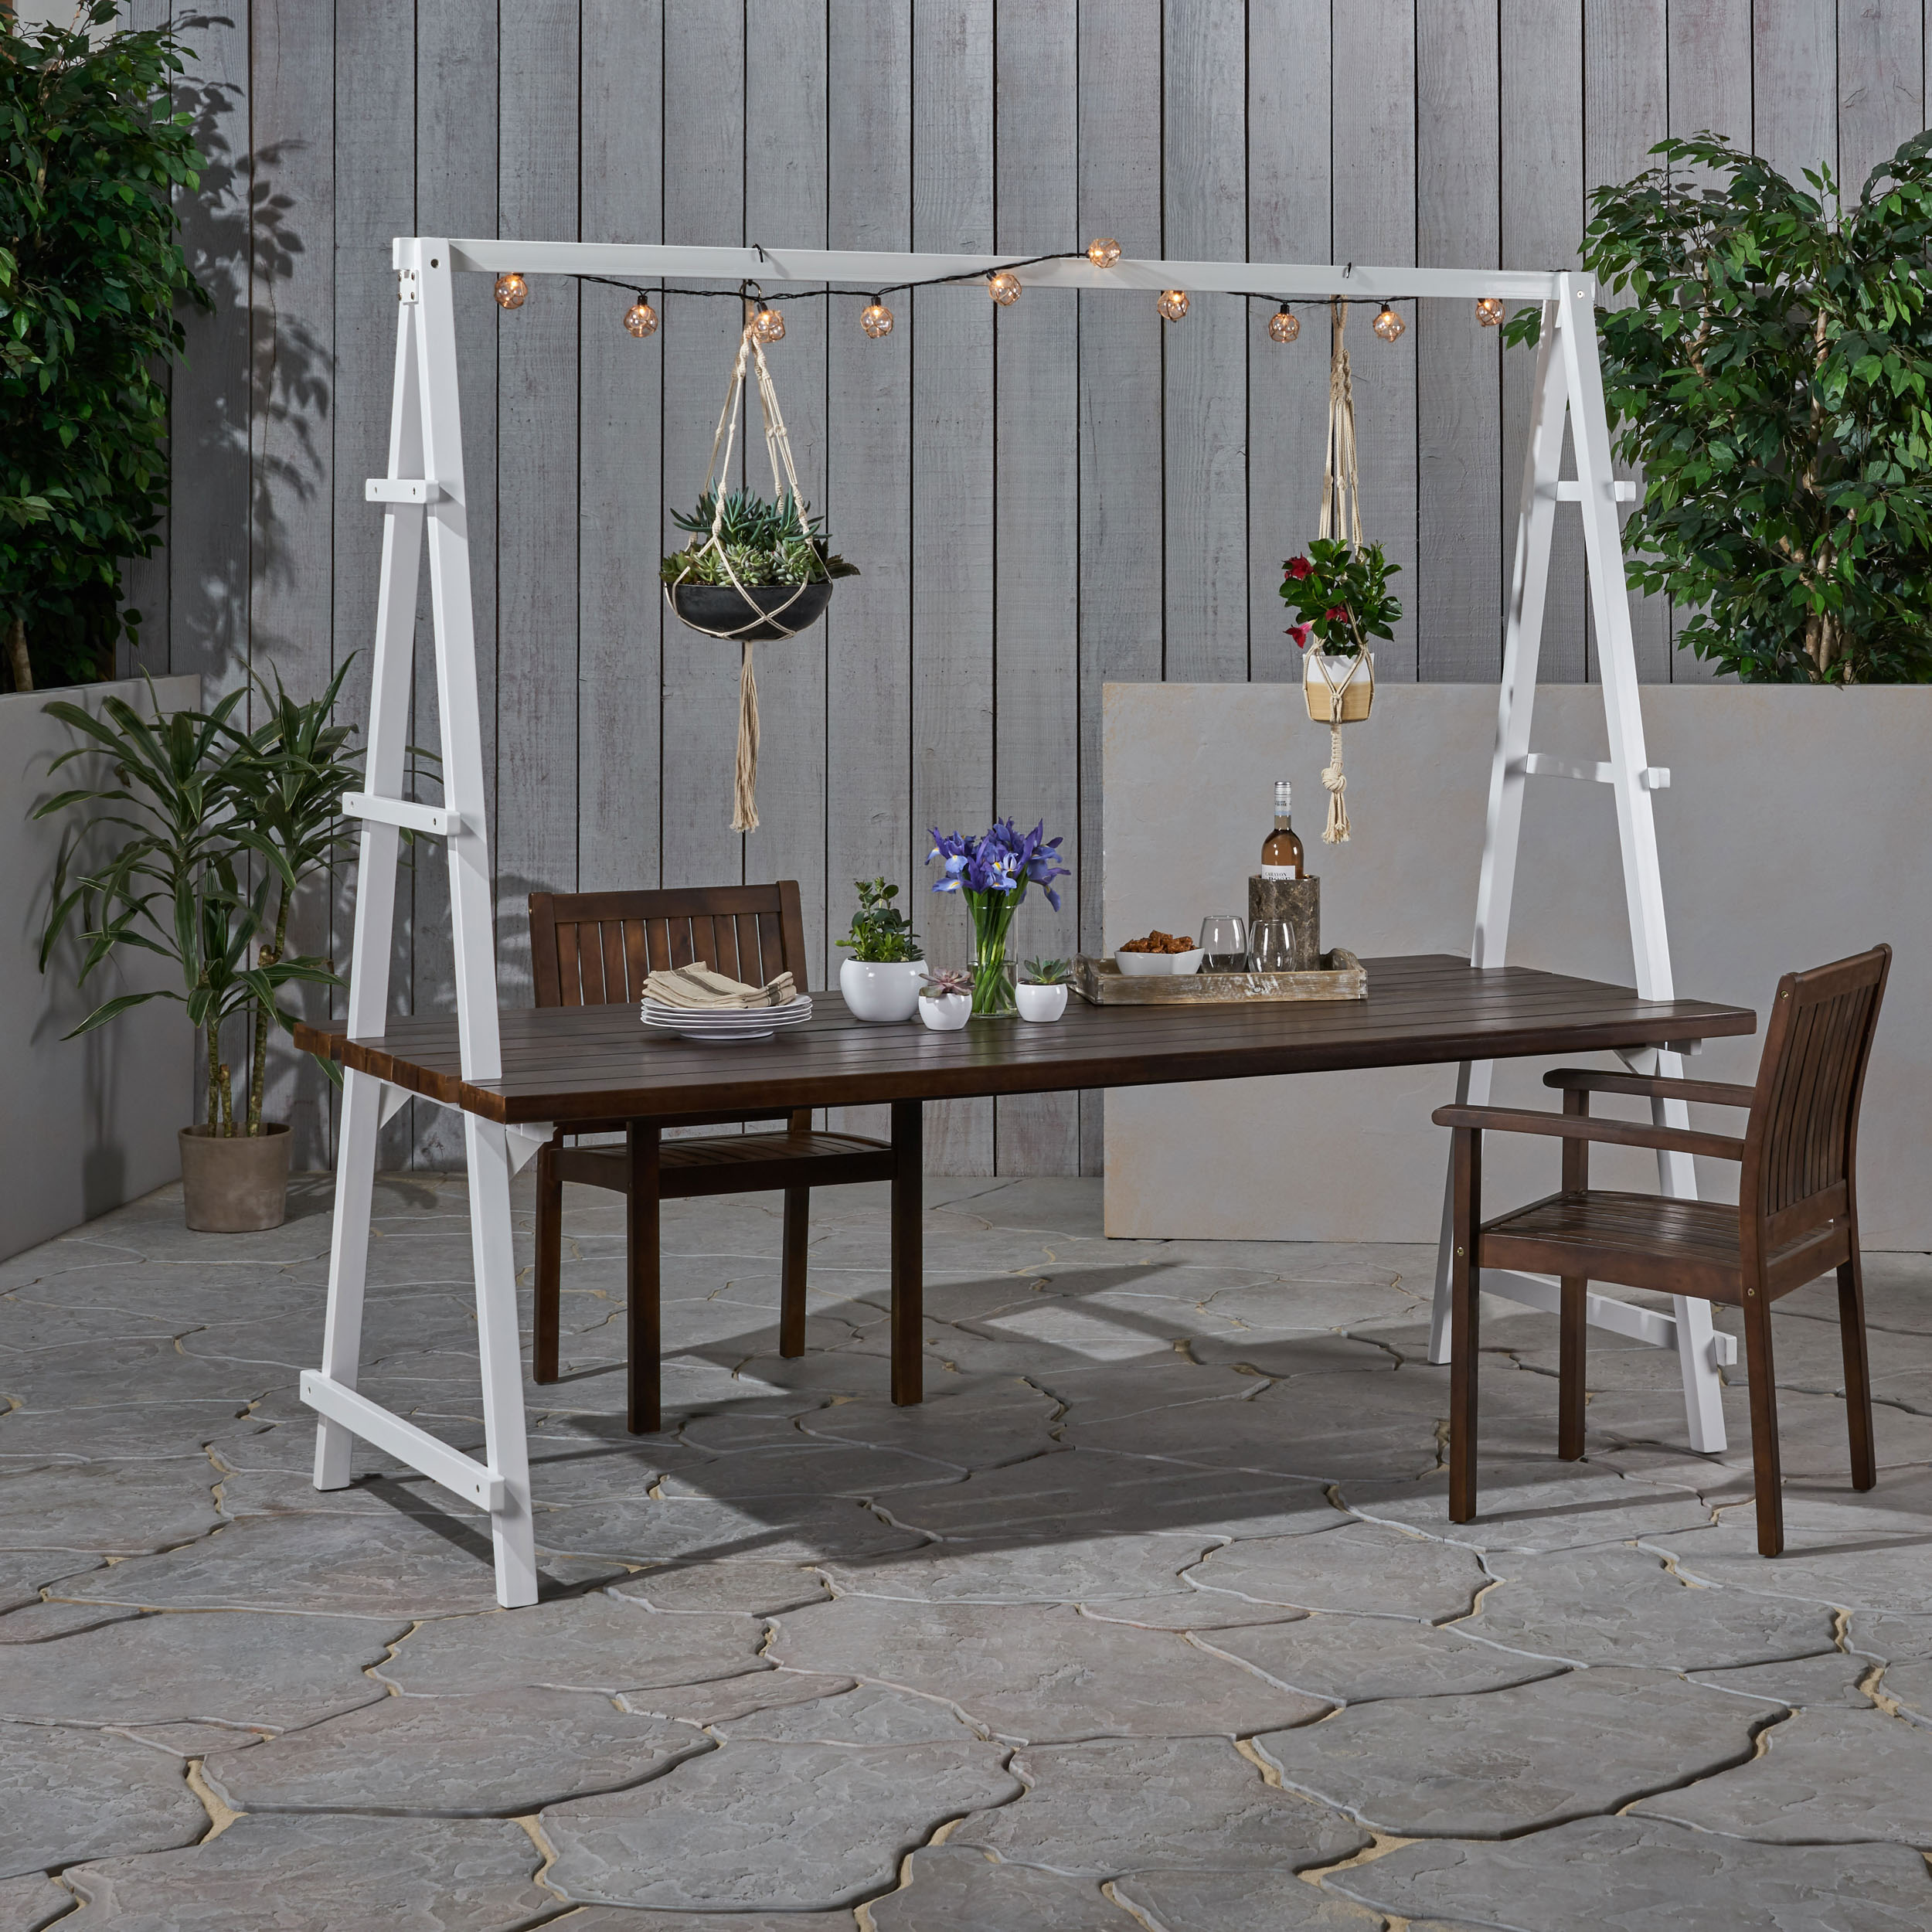 Raven Outdoor Acacia Wood 88.5″ Dining Table with Iron Plant Hanger